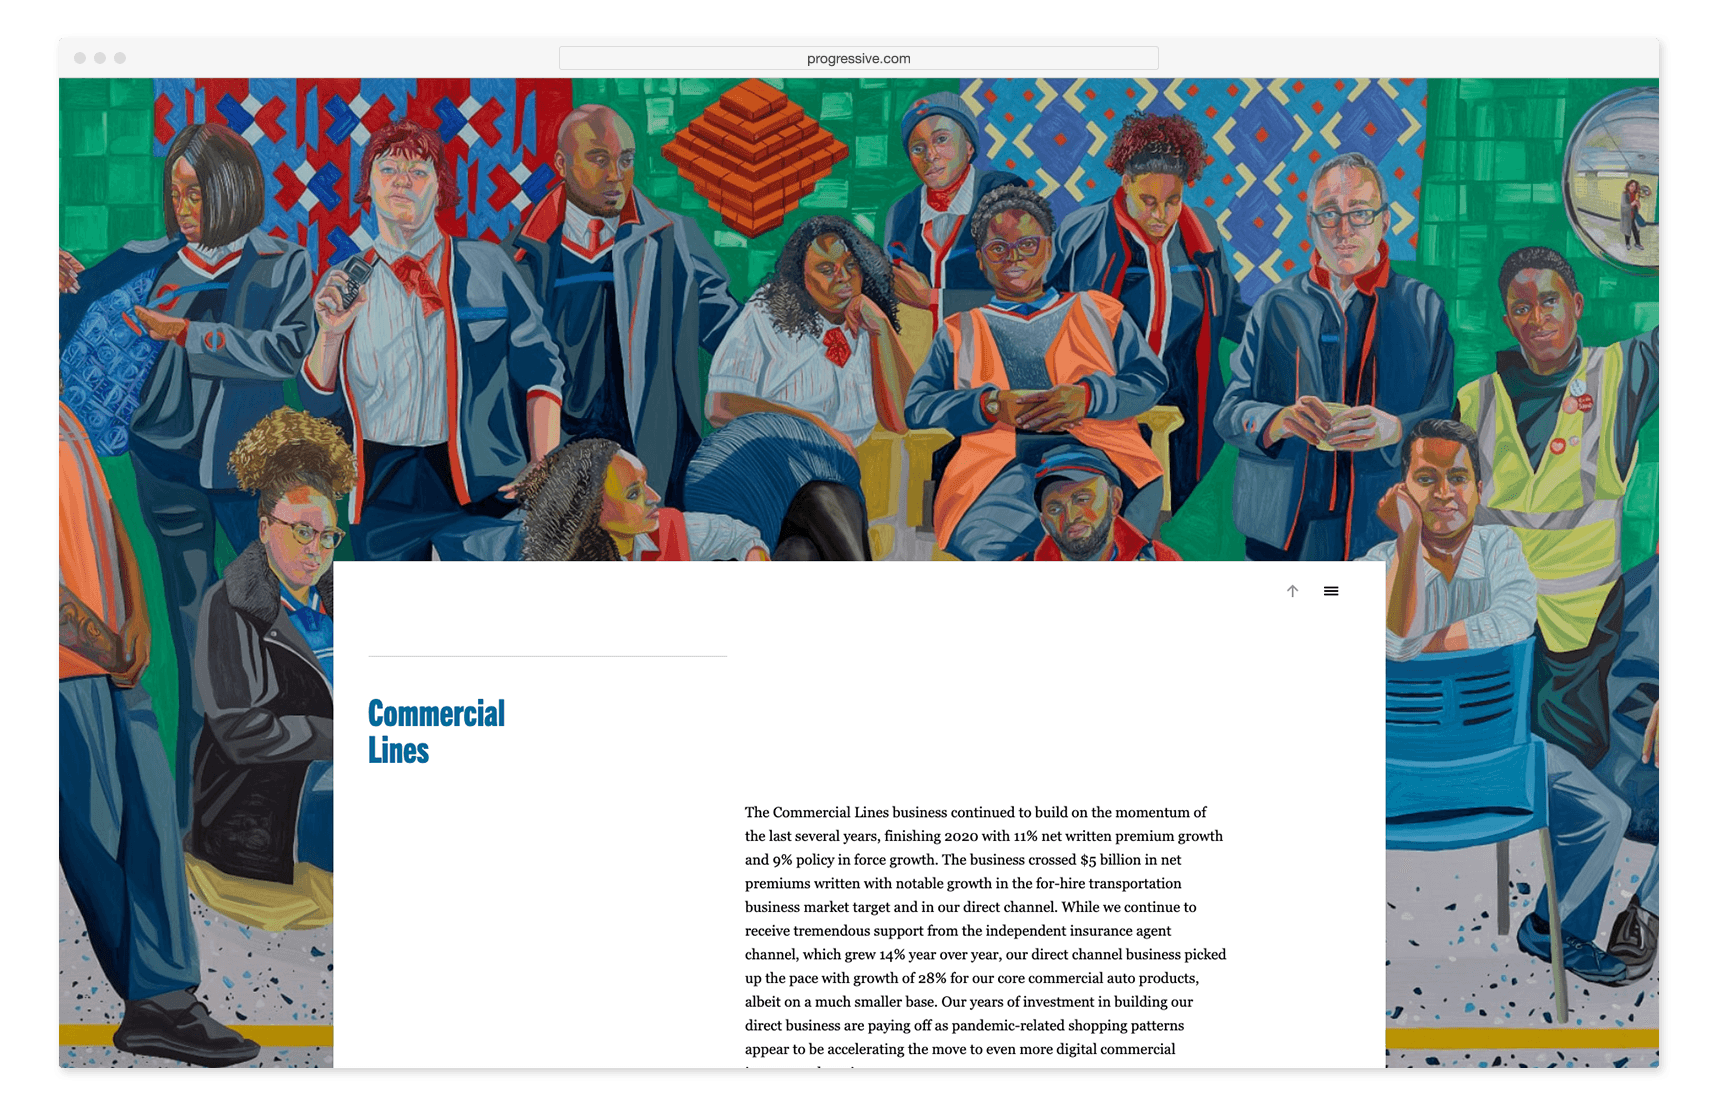 Web browser from The Progressive Corporation Annual Report 2020 showing a chapter head reading "Commercial Lines" and background artwork of many people in a subway station by Aliza Nisenbaum.